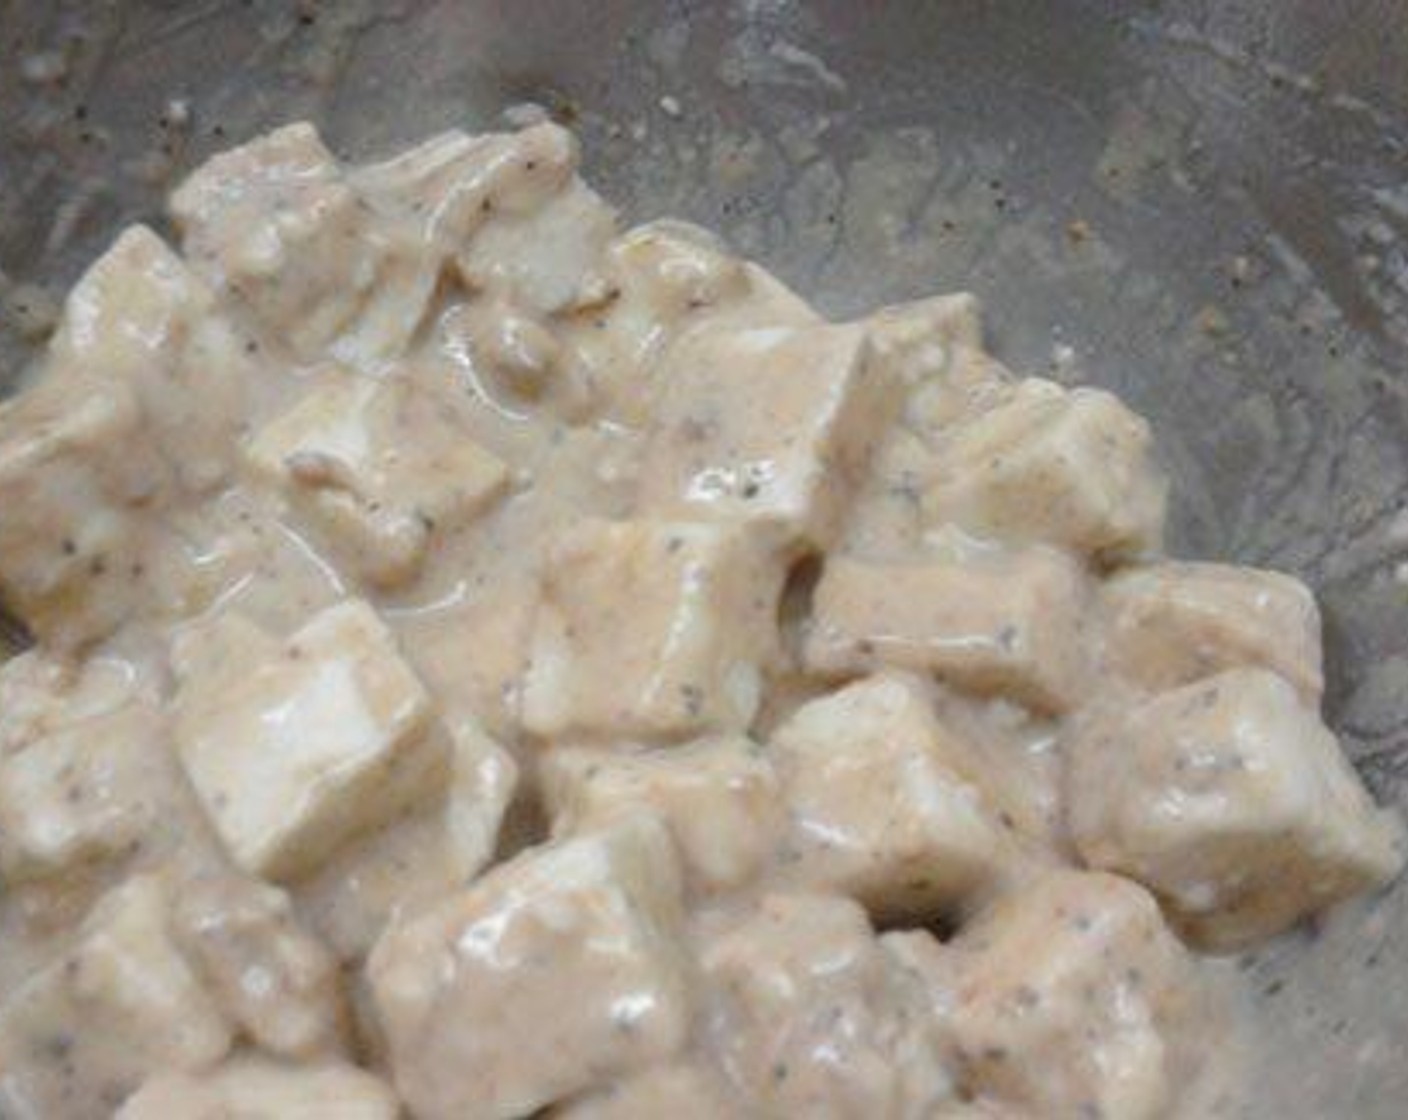 step 1 Marinate the Paneer (3/4 cup) cubes with Corn Flour (2 Tbsp), All-Purpose Flour (2 Tbsp), Soy Sauce (1/2 Tbsp), Ginger Garlic Paste (1 Tbsp), Ground Black Pepper (1/2 Tbsp), and Salt (to taste). Keep this for 10 to 15 minutes. Fry this in oil till it becomes golden brown in color.